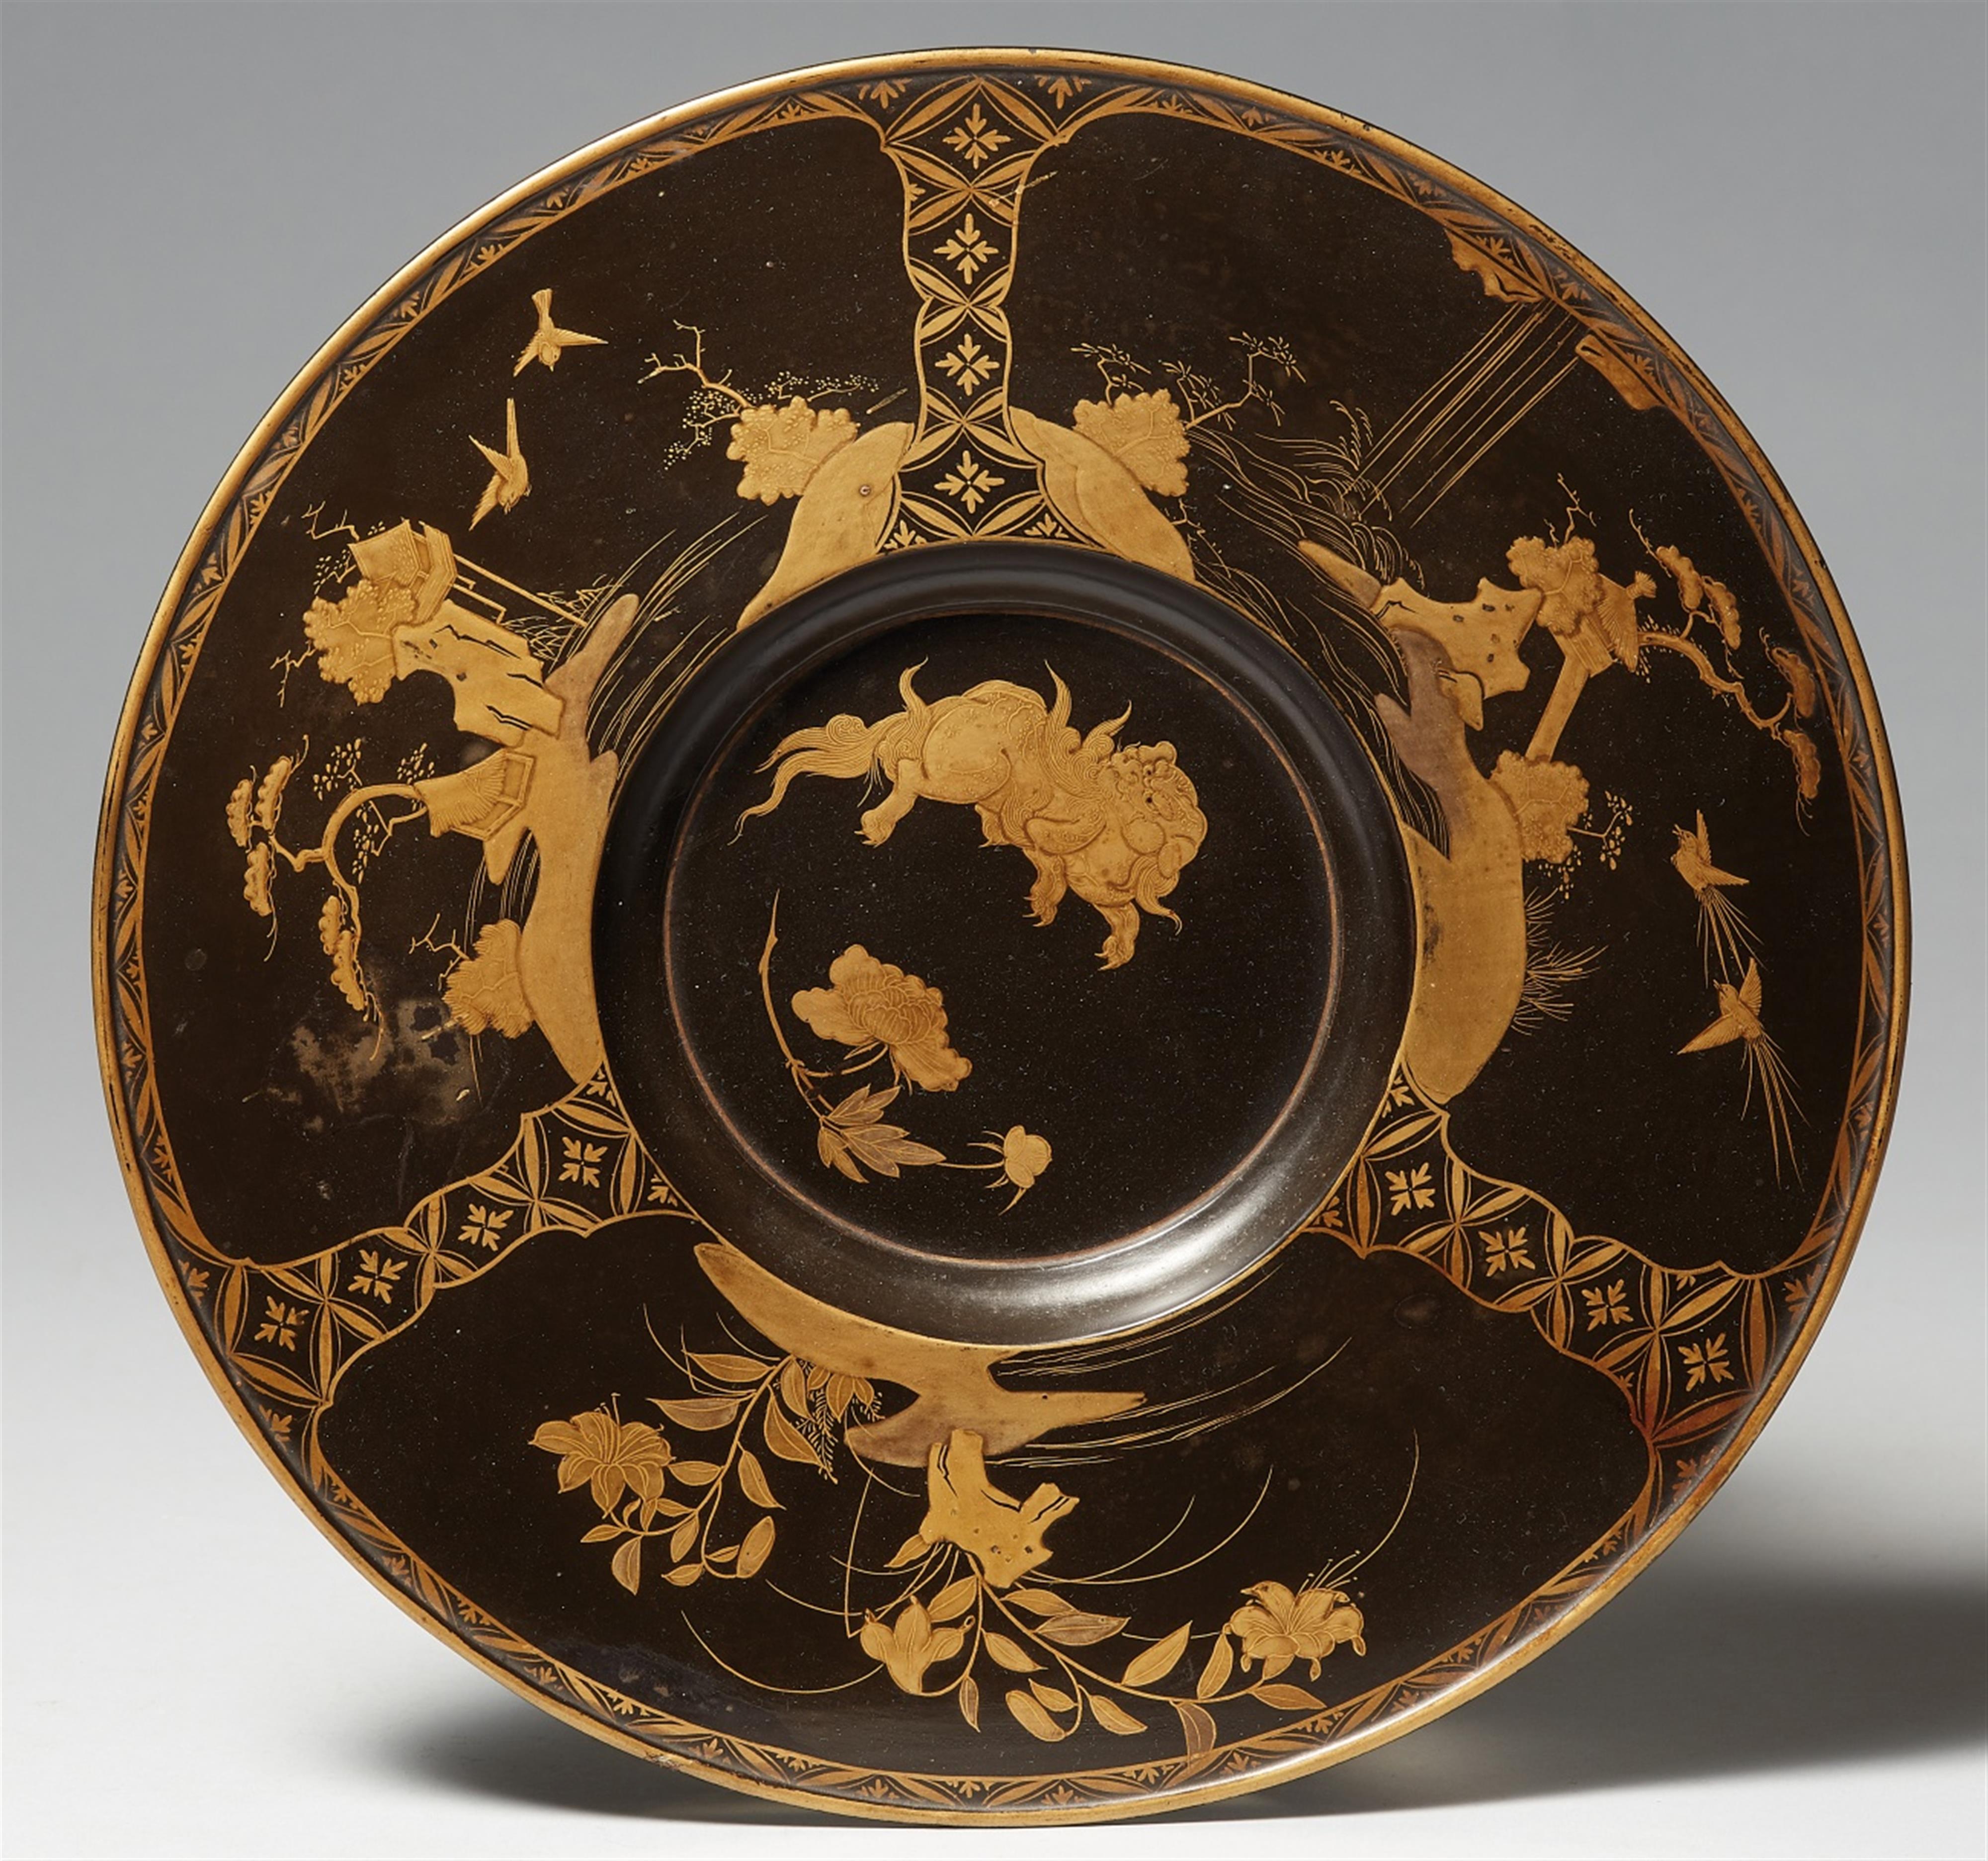 A lacquer export dish. Around 1680-1730 - image-1